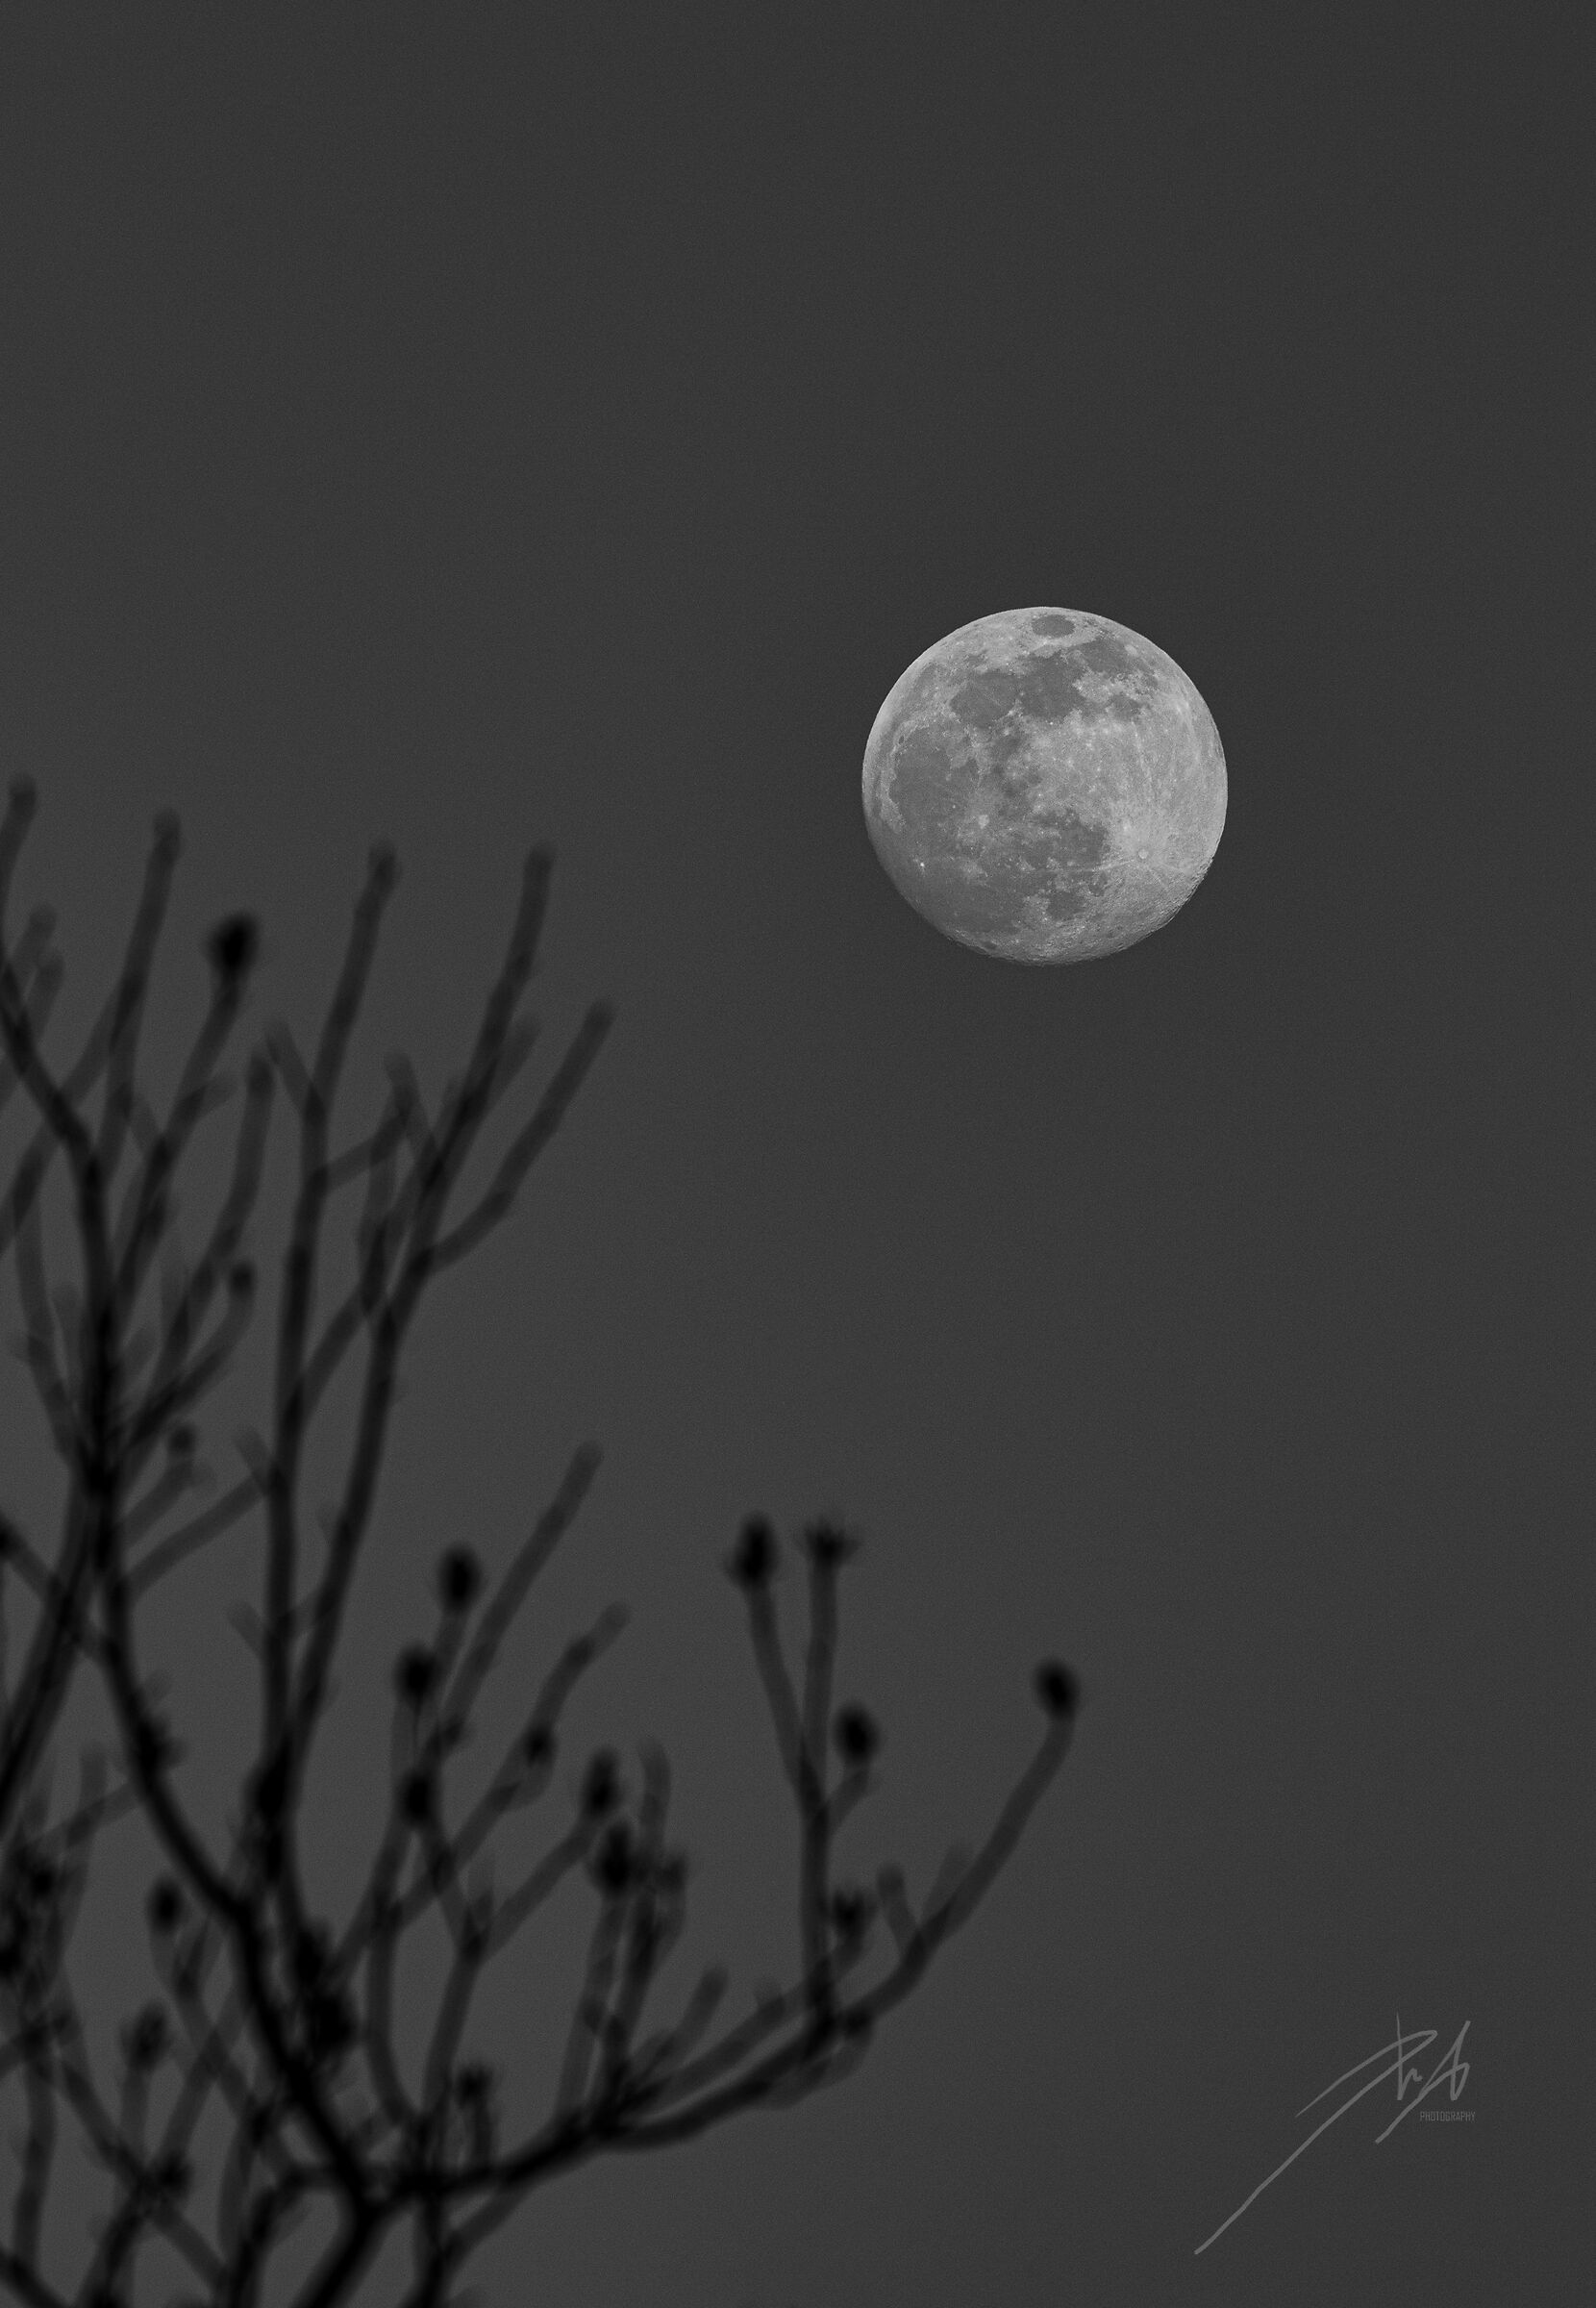 Moon with branches...